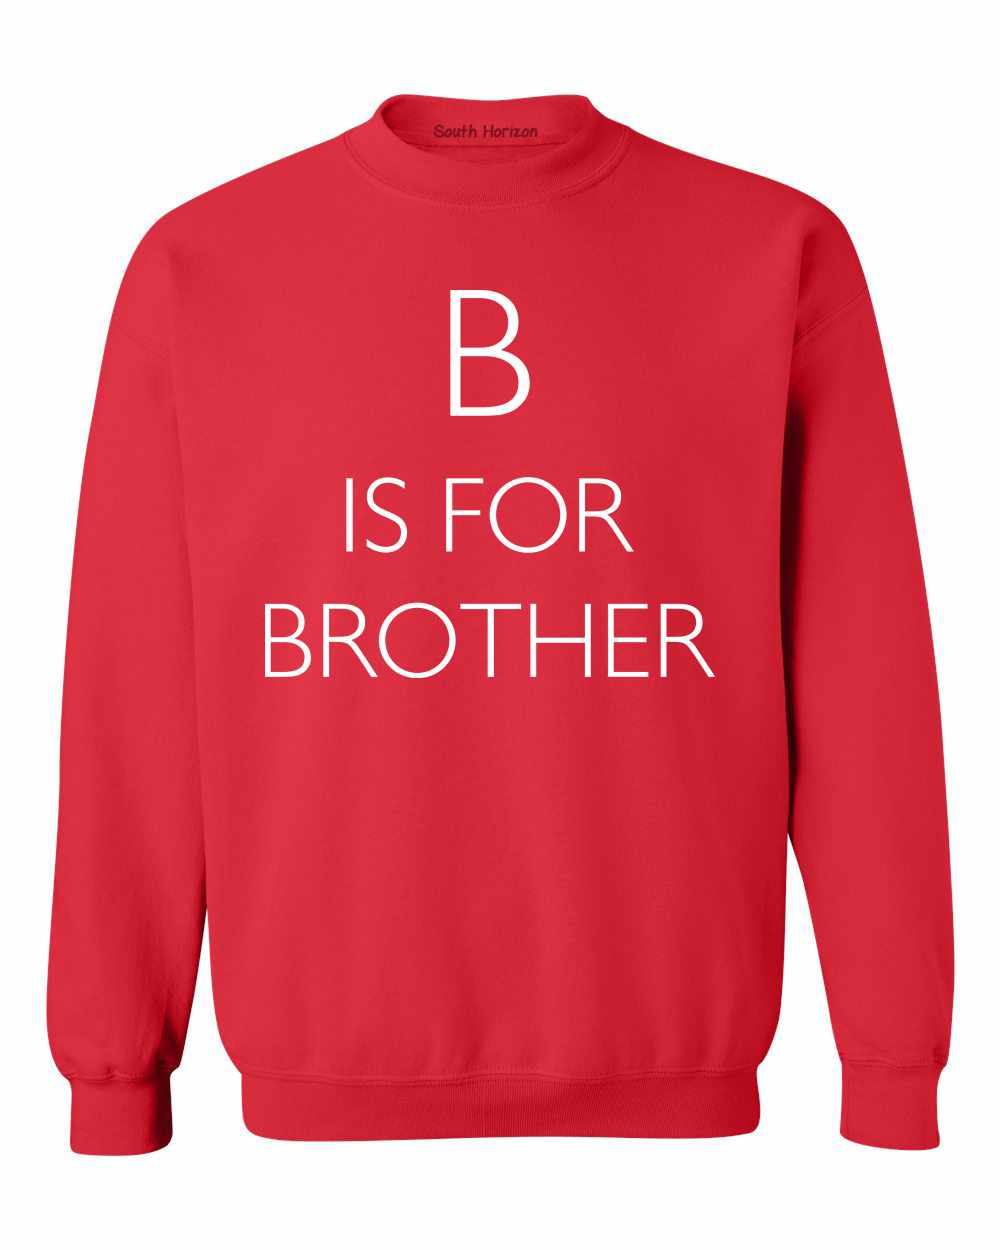 B is for Brother on SweatShirt (#1009-11)